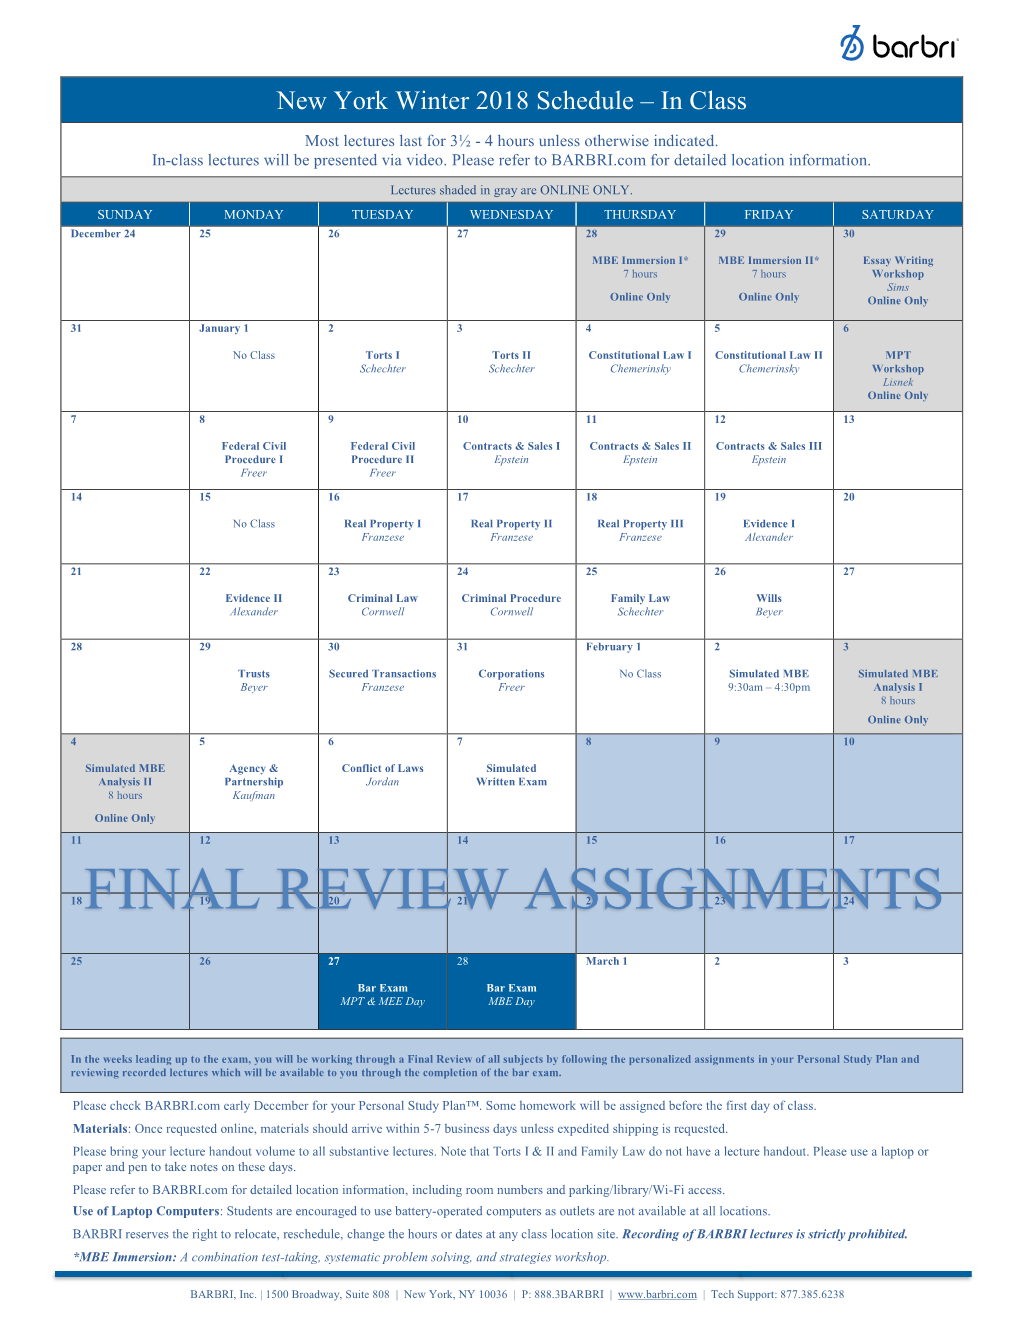 Final Review Assignments